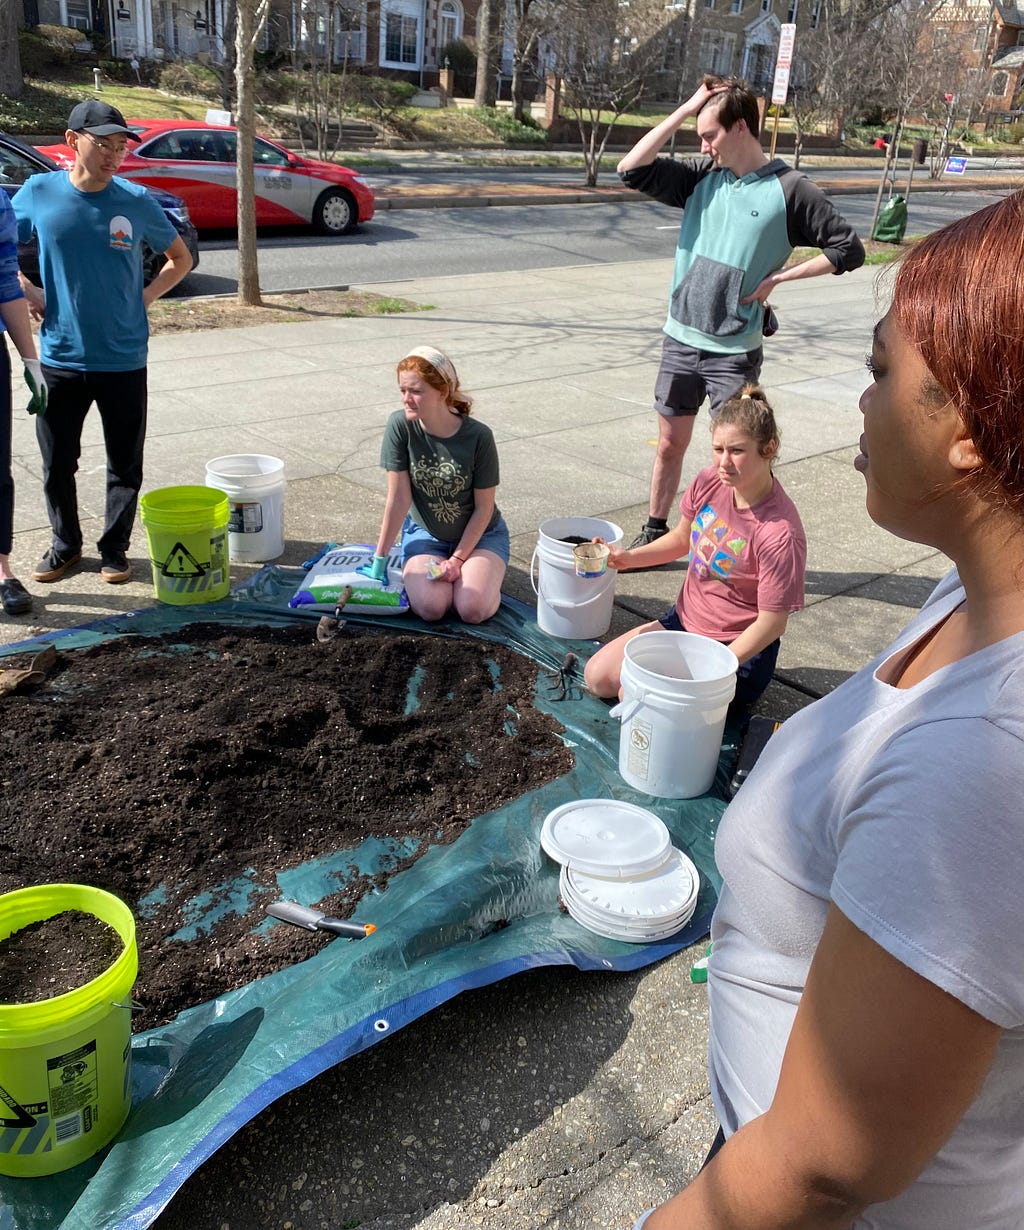 Five people standing around a tarp with soil and buckets in order to plant vegetables for community garden.